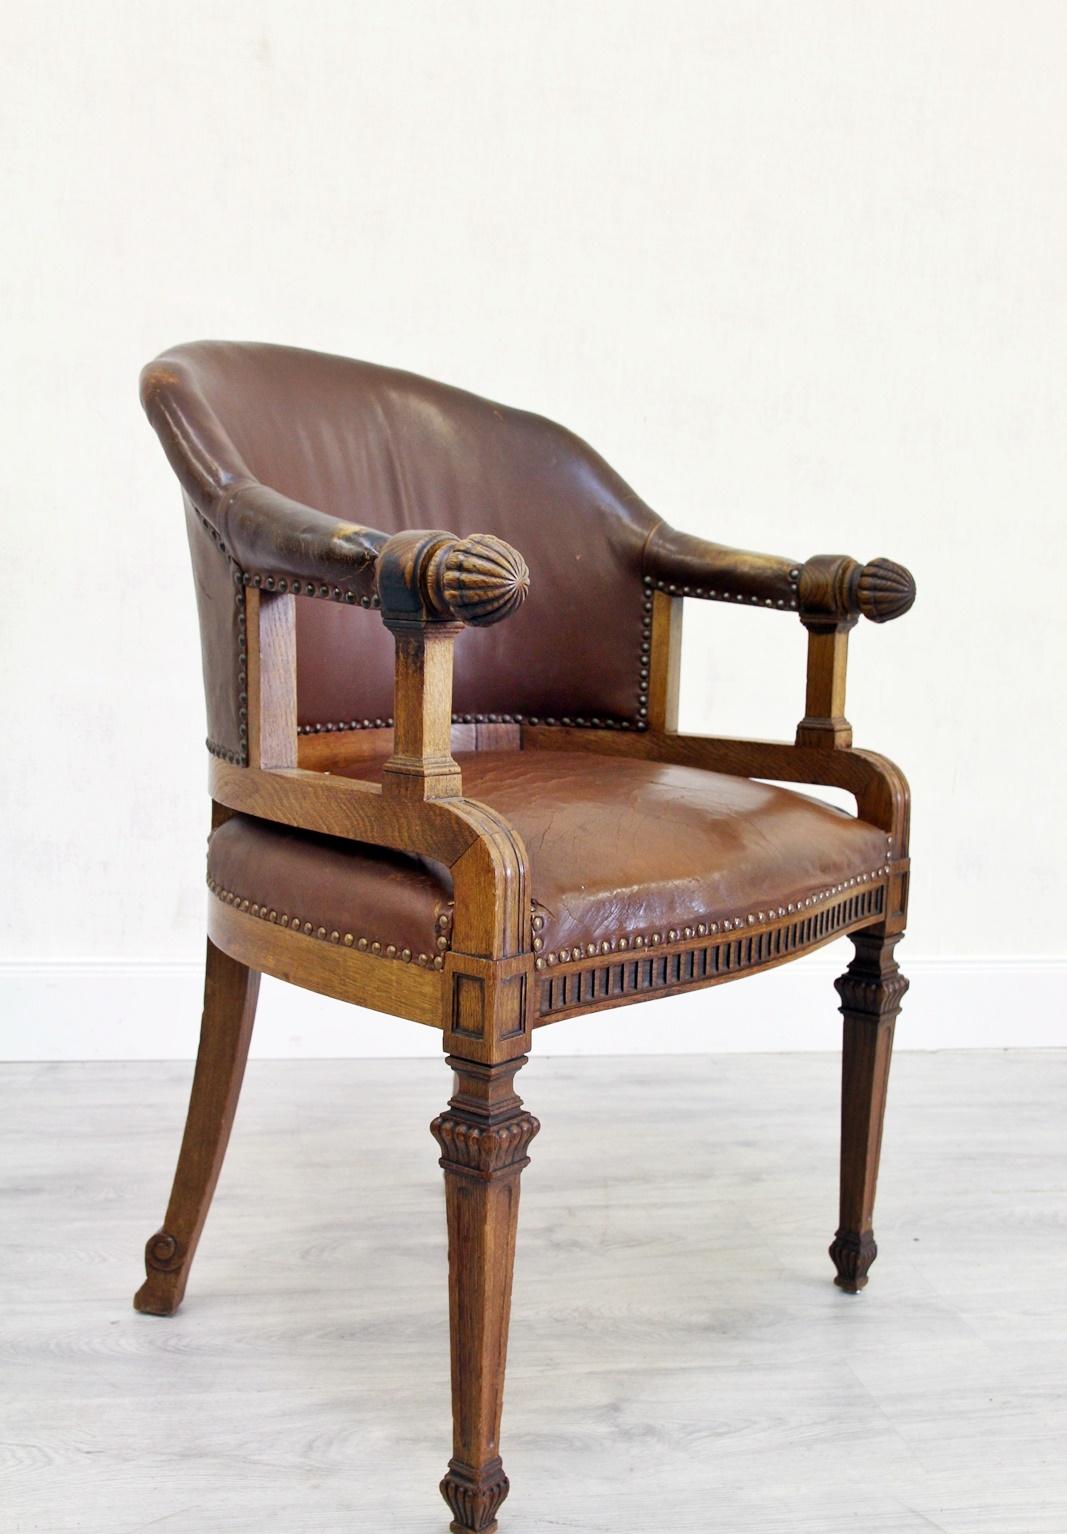 19th Century Office Chair Antique Early Days Armchair Office Armchair Leather Vintage Chair For Sale